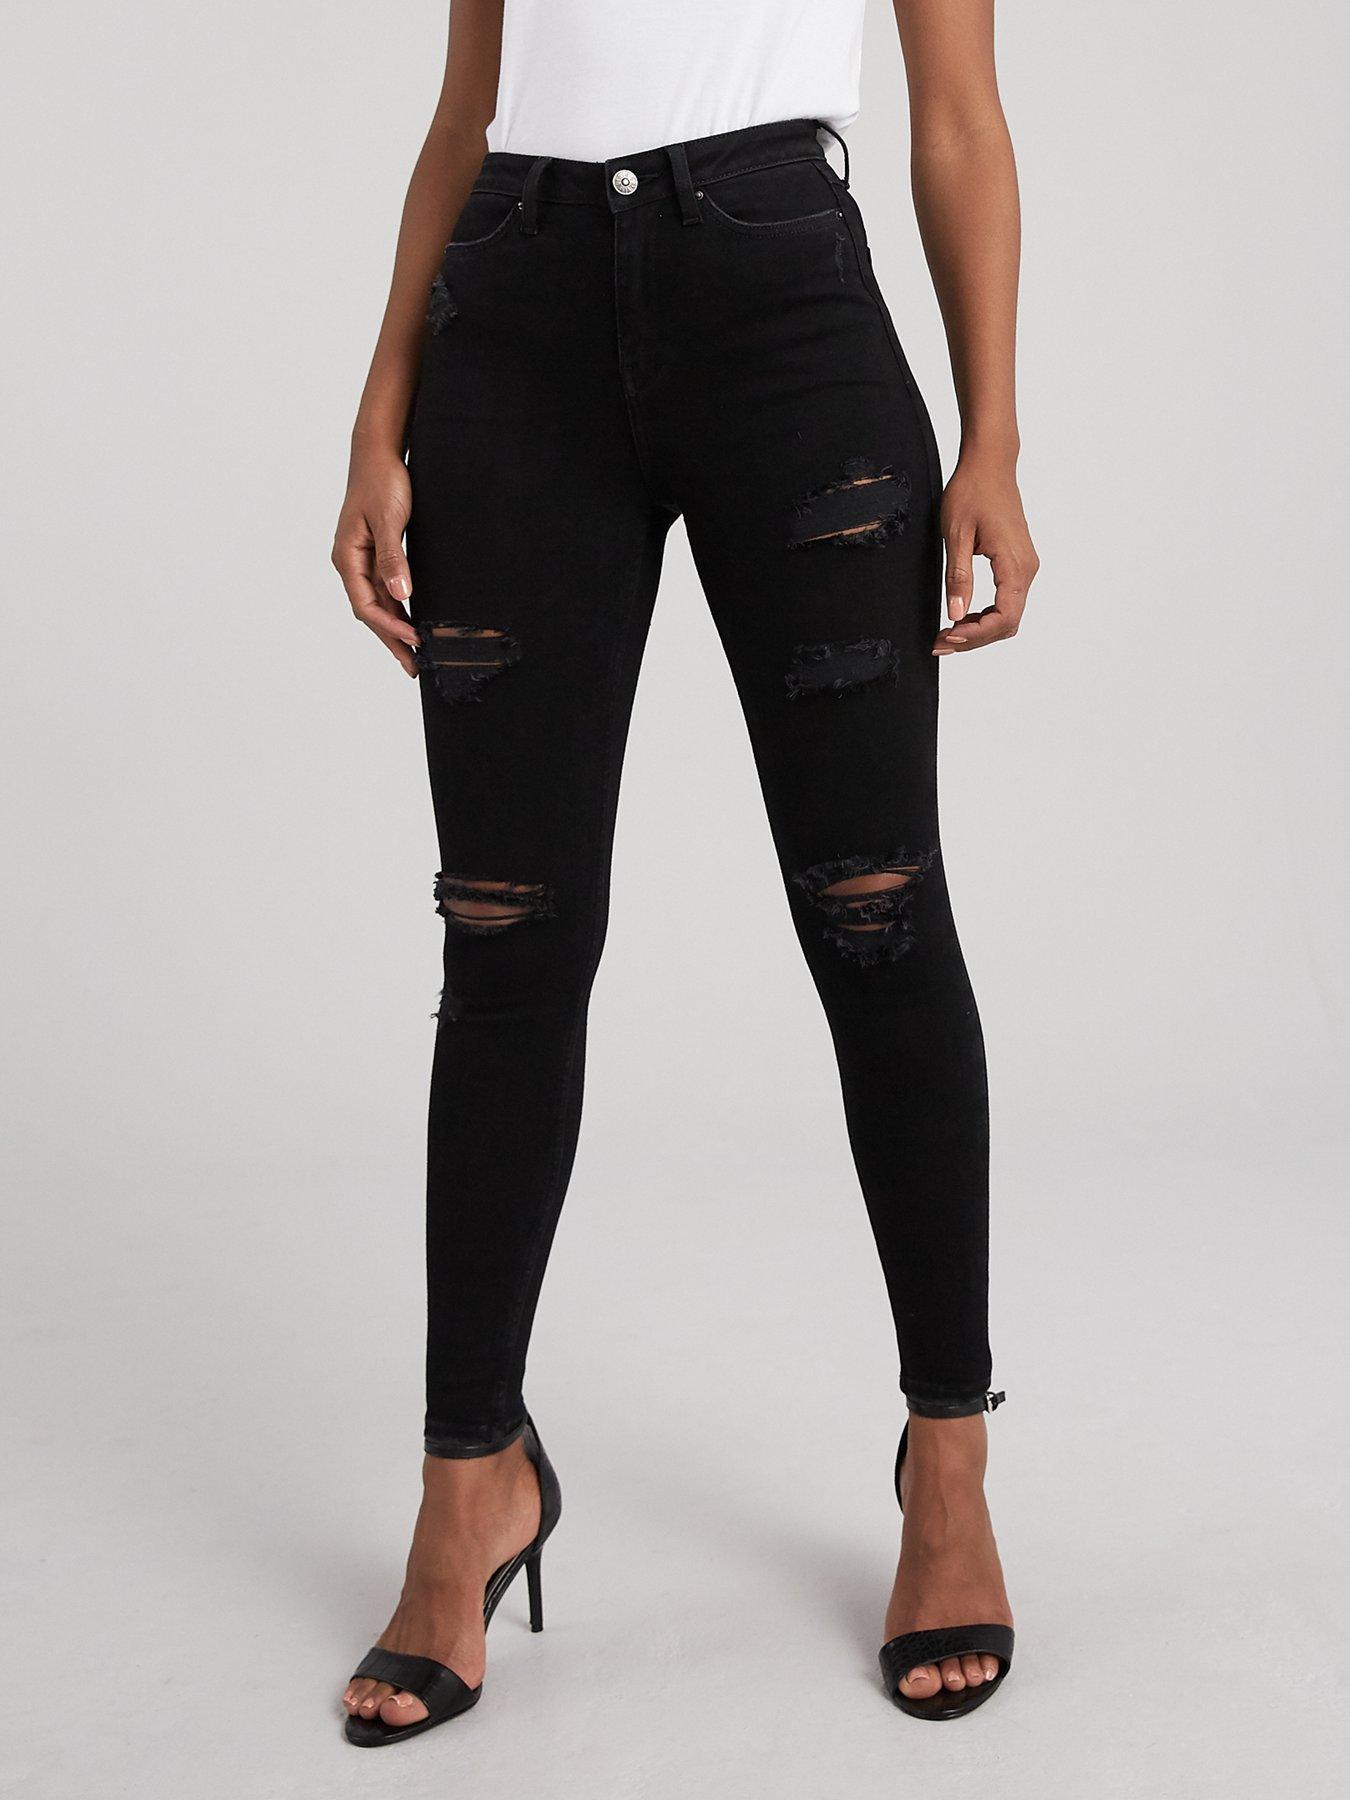 black extreme ripped skinny jeans womens